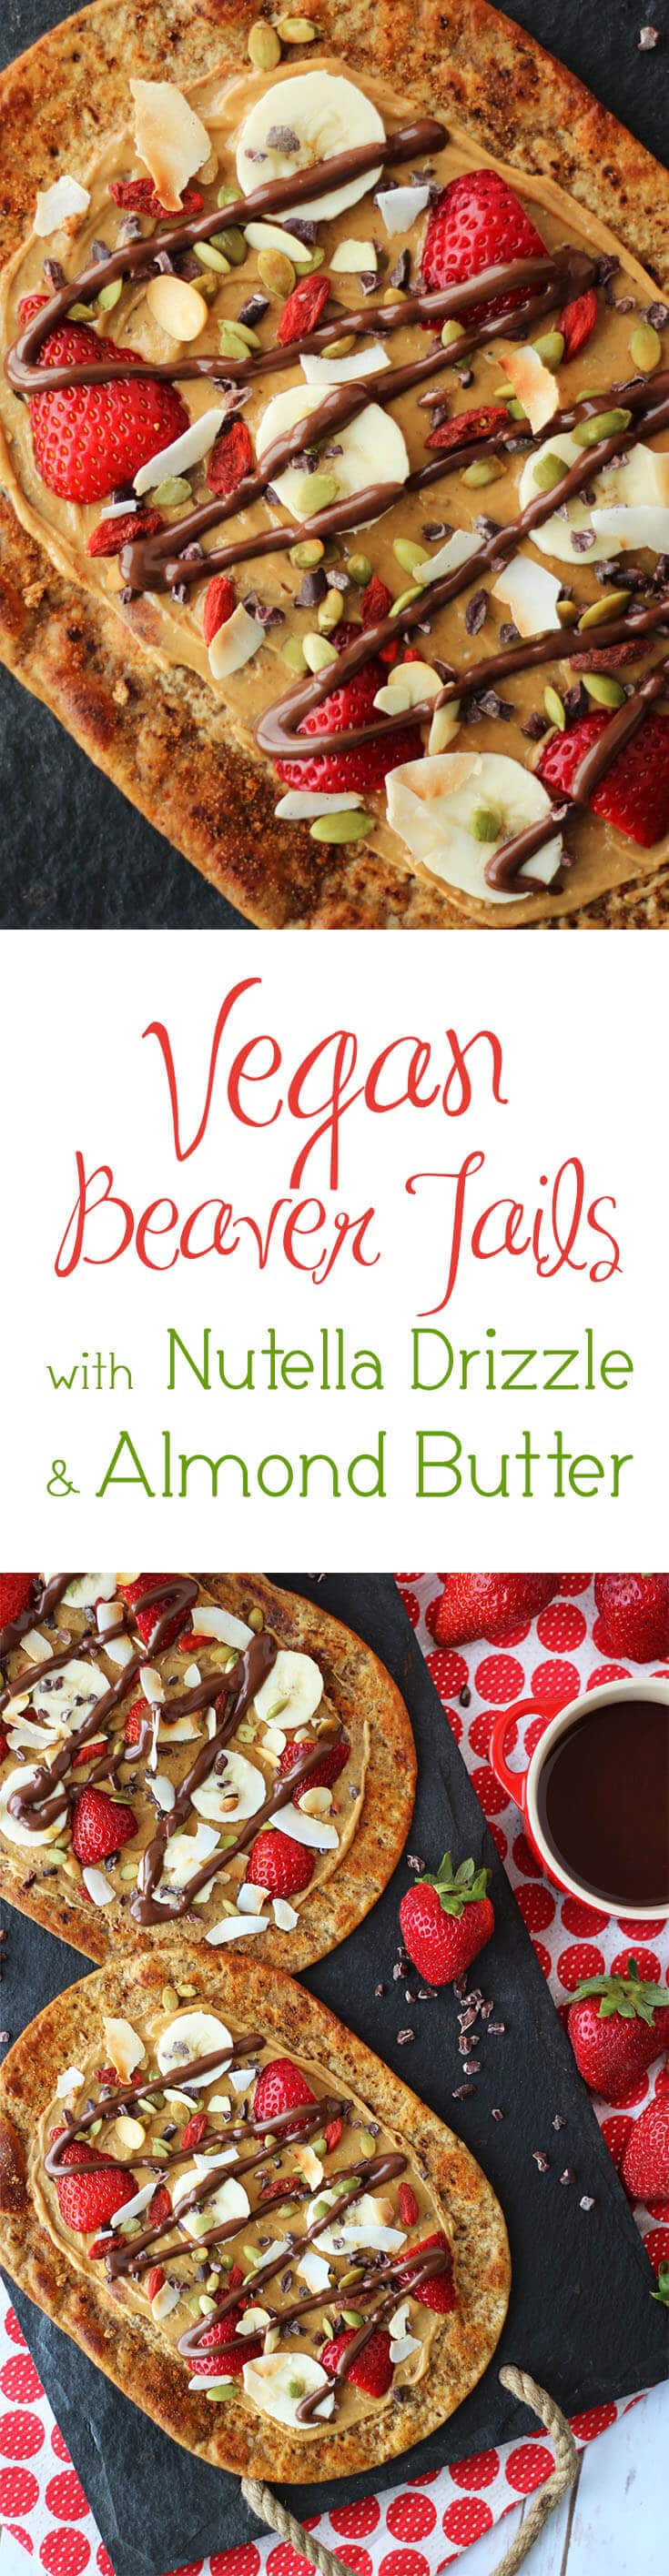 A pinterest image of beaver tails with the overlay text \"Vegan Beaver Tails with Nutella Drizzle & Almond Butter.\"